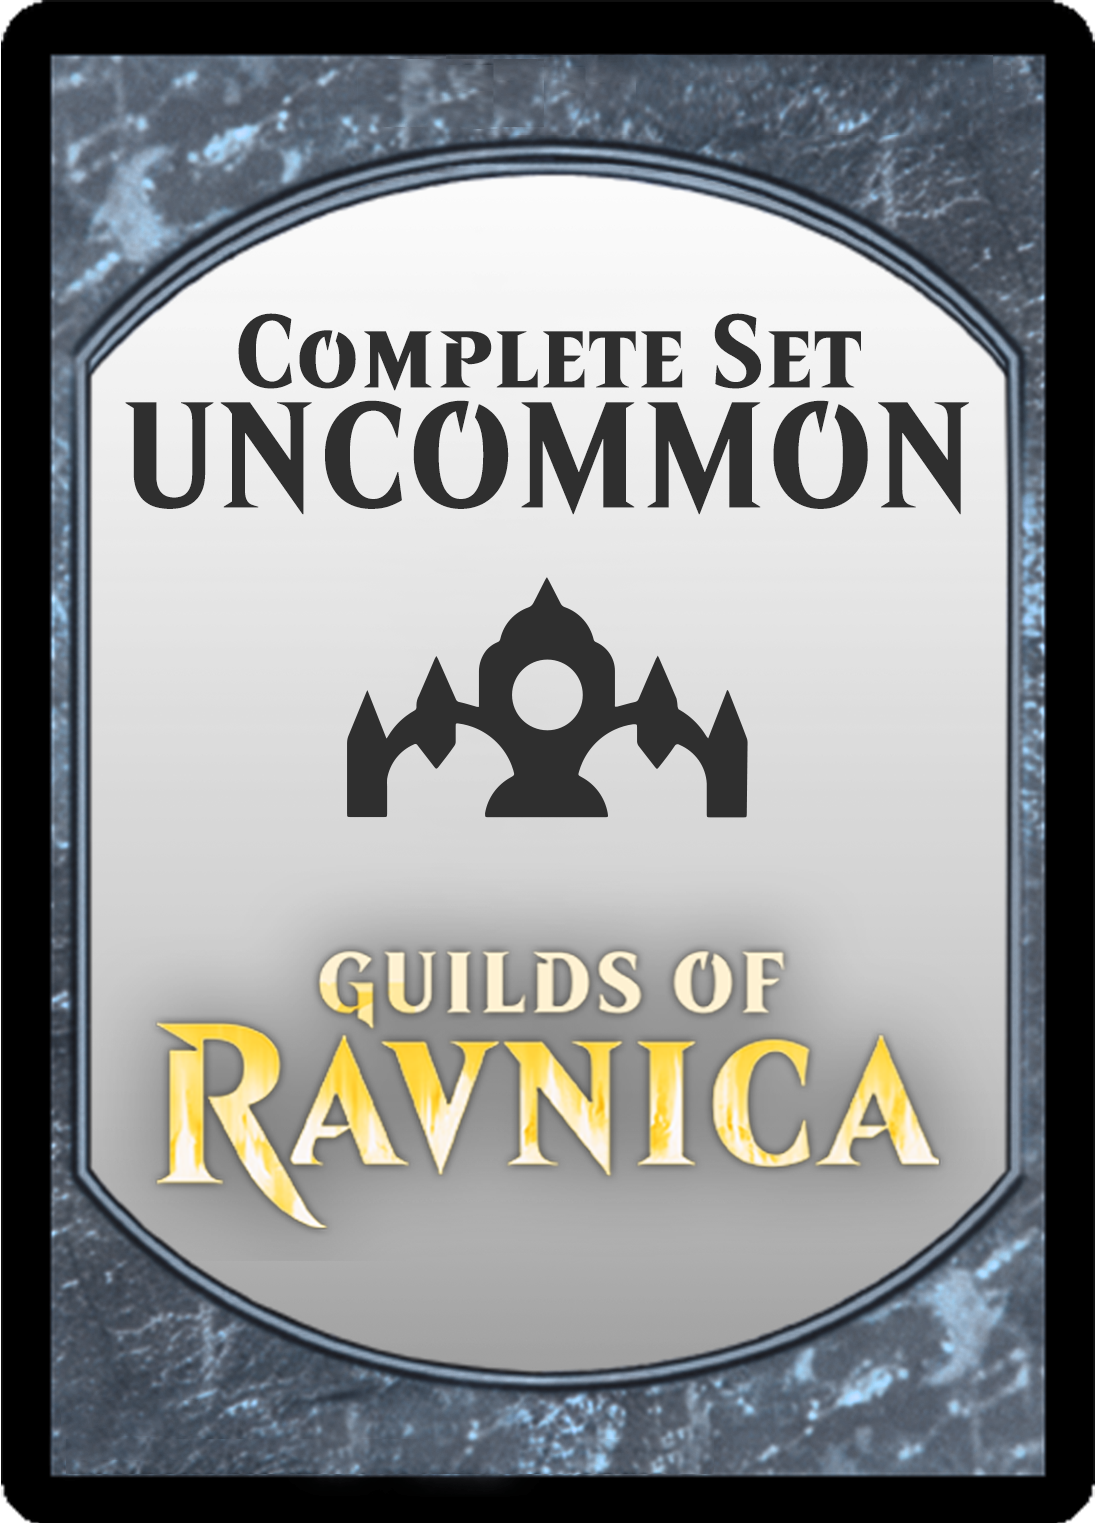 Guilds of Ravnica Uncommon Set